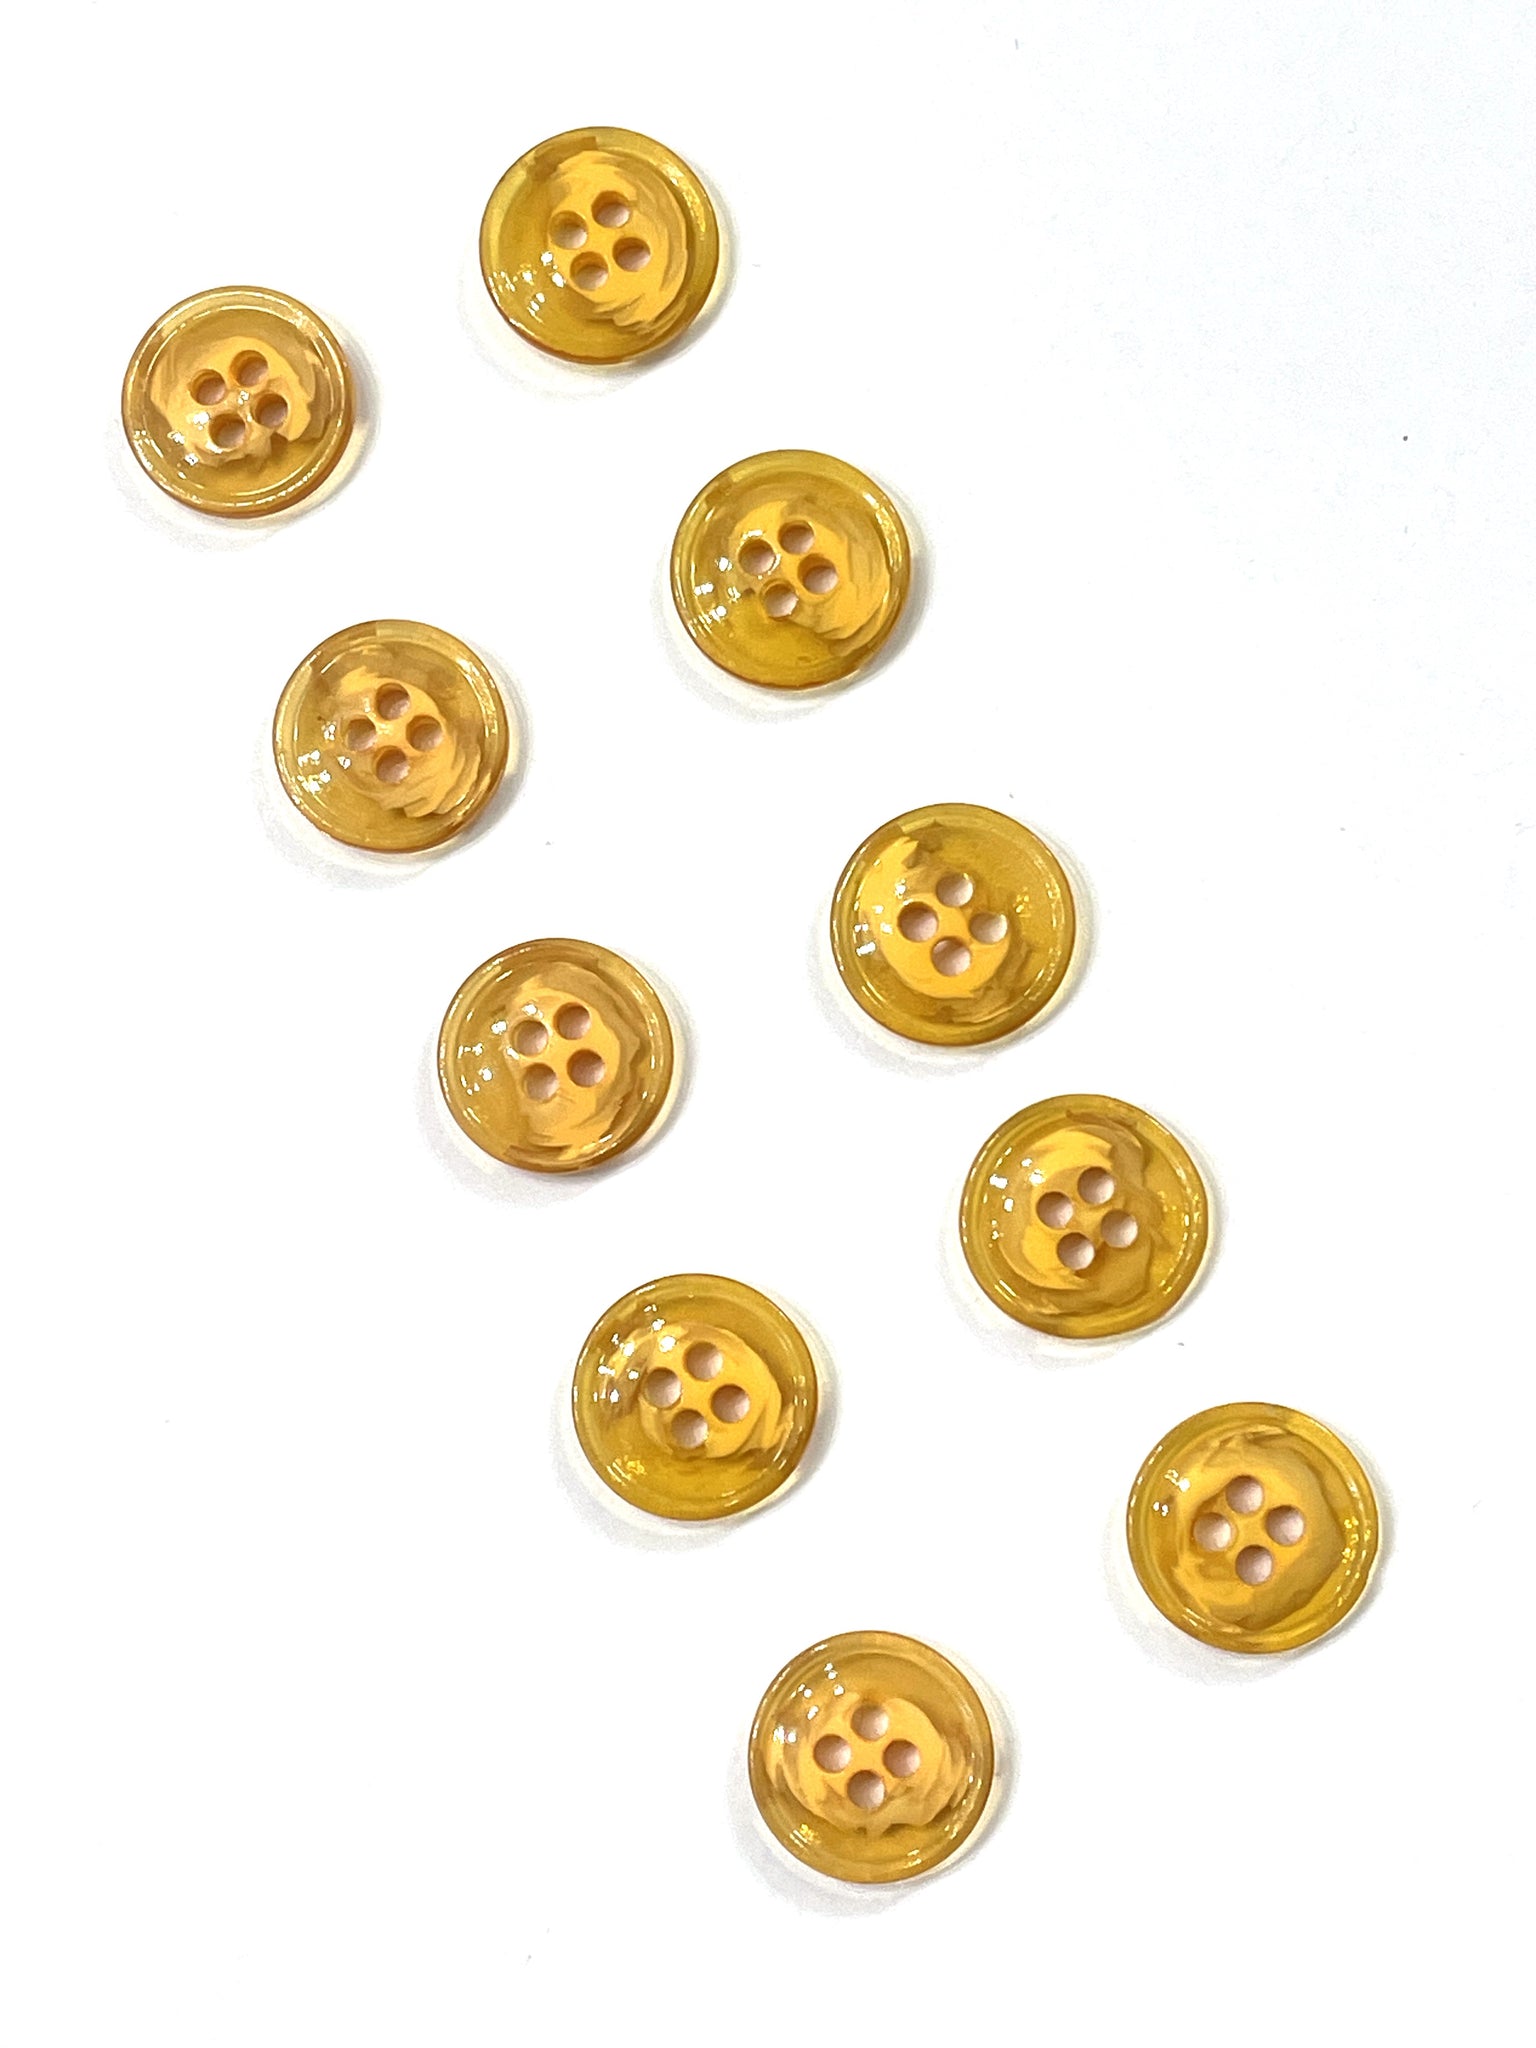 Buttons 4 Hole Plastic Set of 10 - Marbled Clear and Opaque Yellow